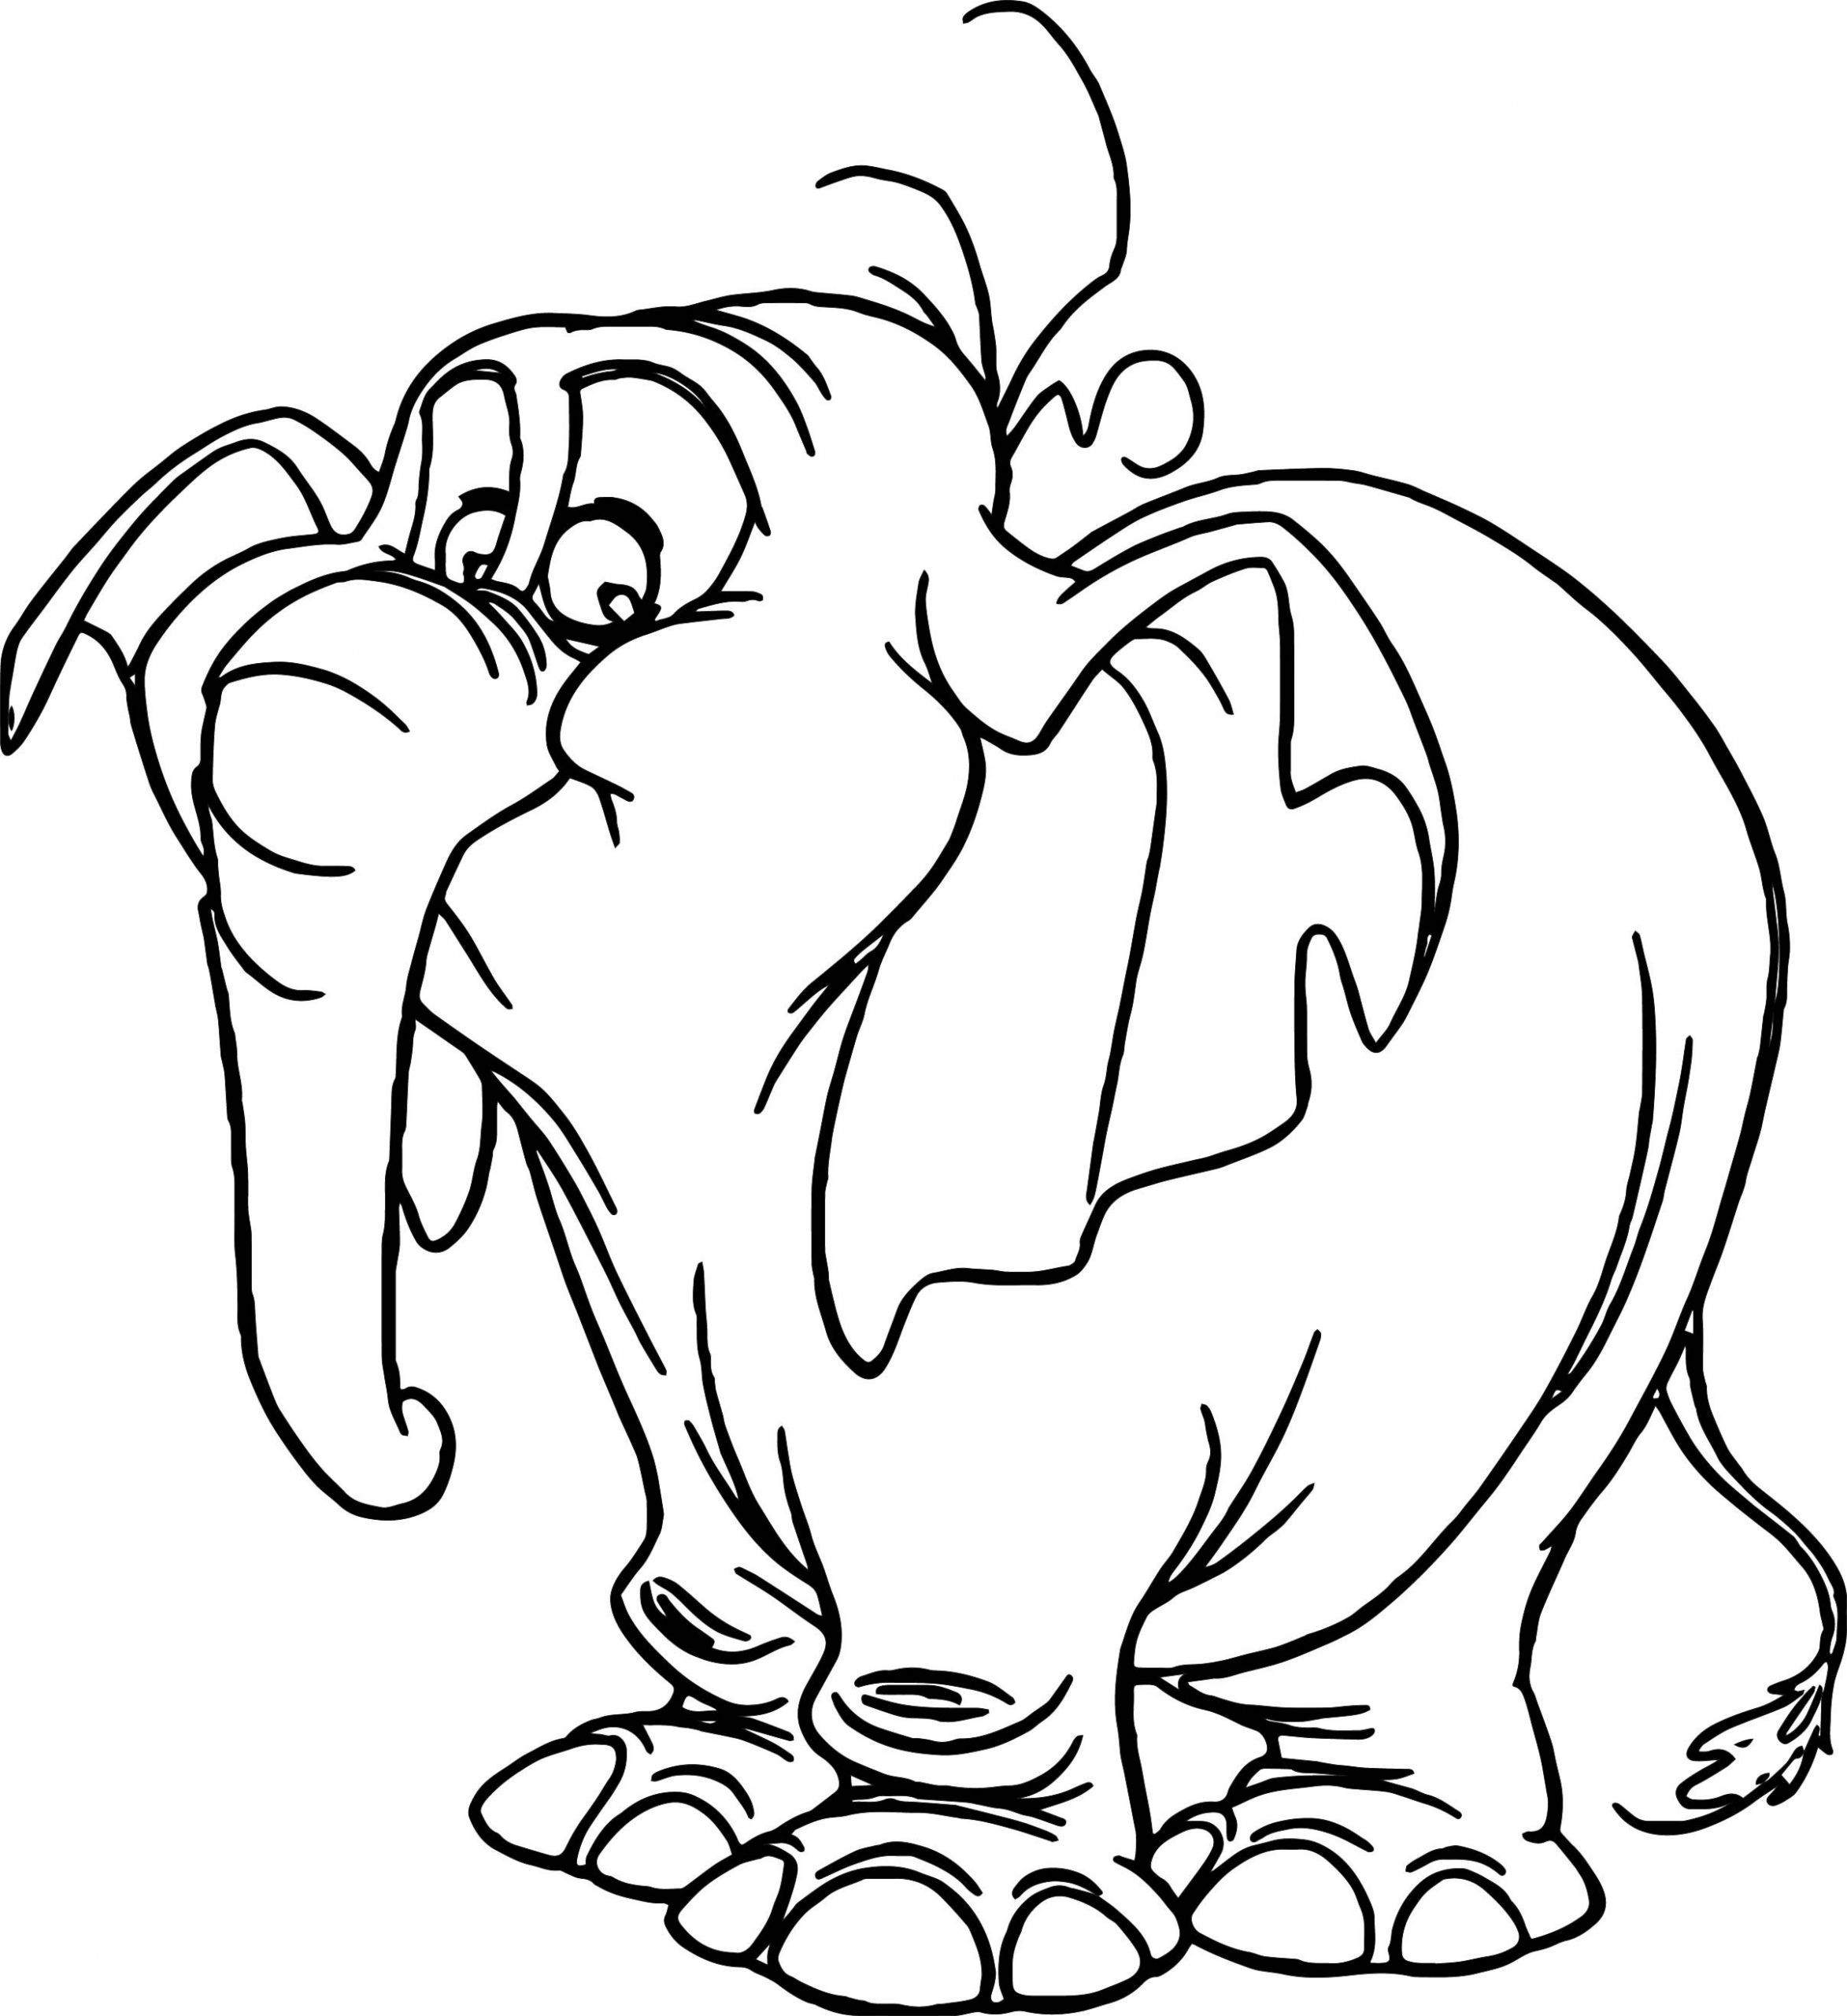 Cute Baby Elephant Coloring Pages
 Tantor Cute Baby Elephant Coloring Page